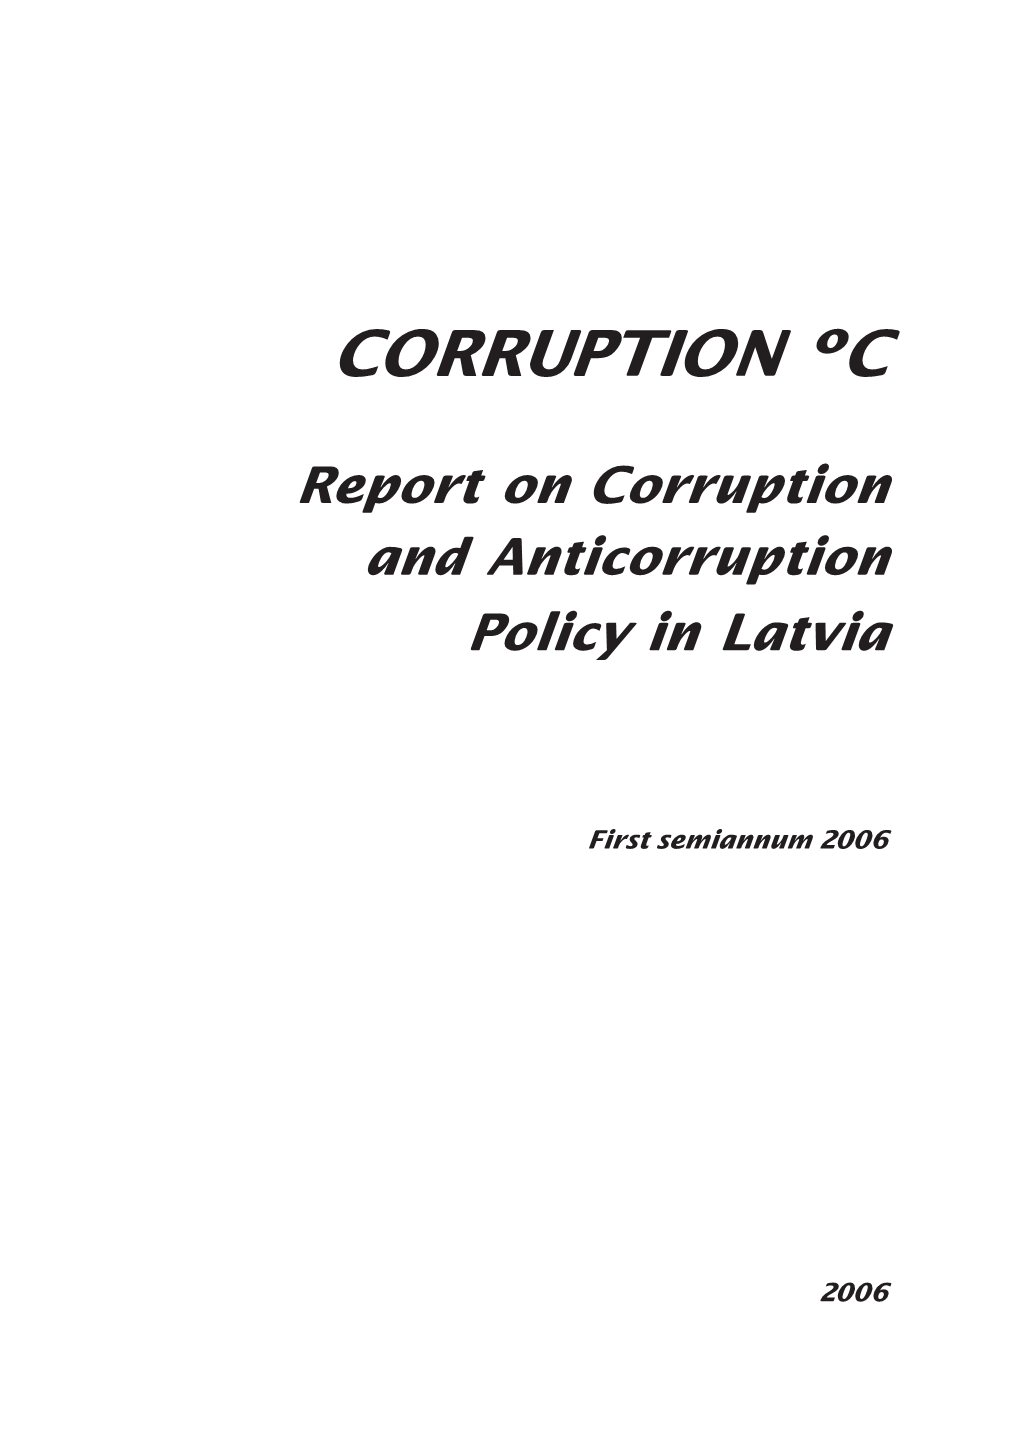 Corruption C. Report on Corruption and Anticorruption Policy in Latvia